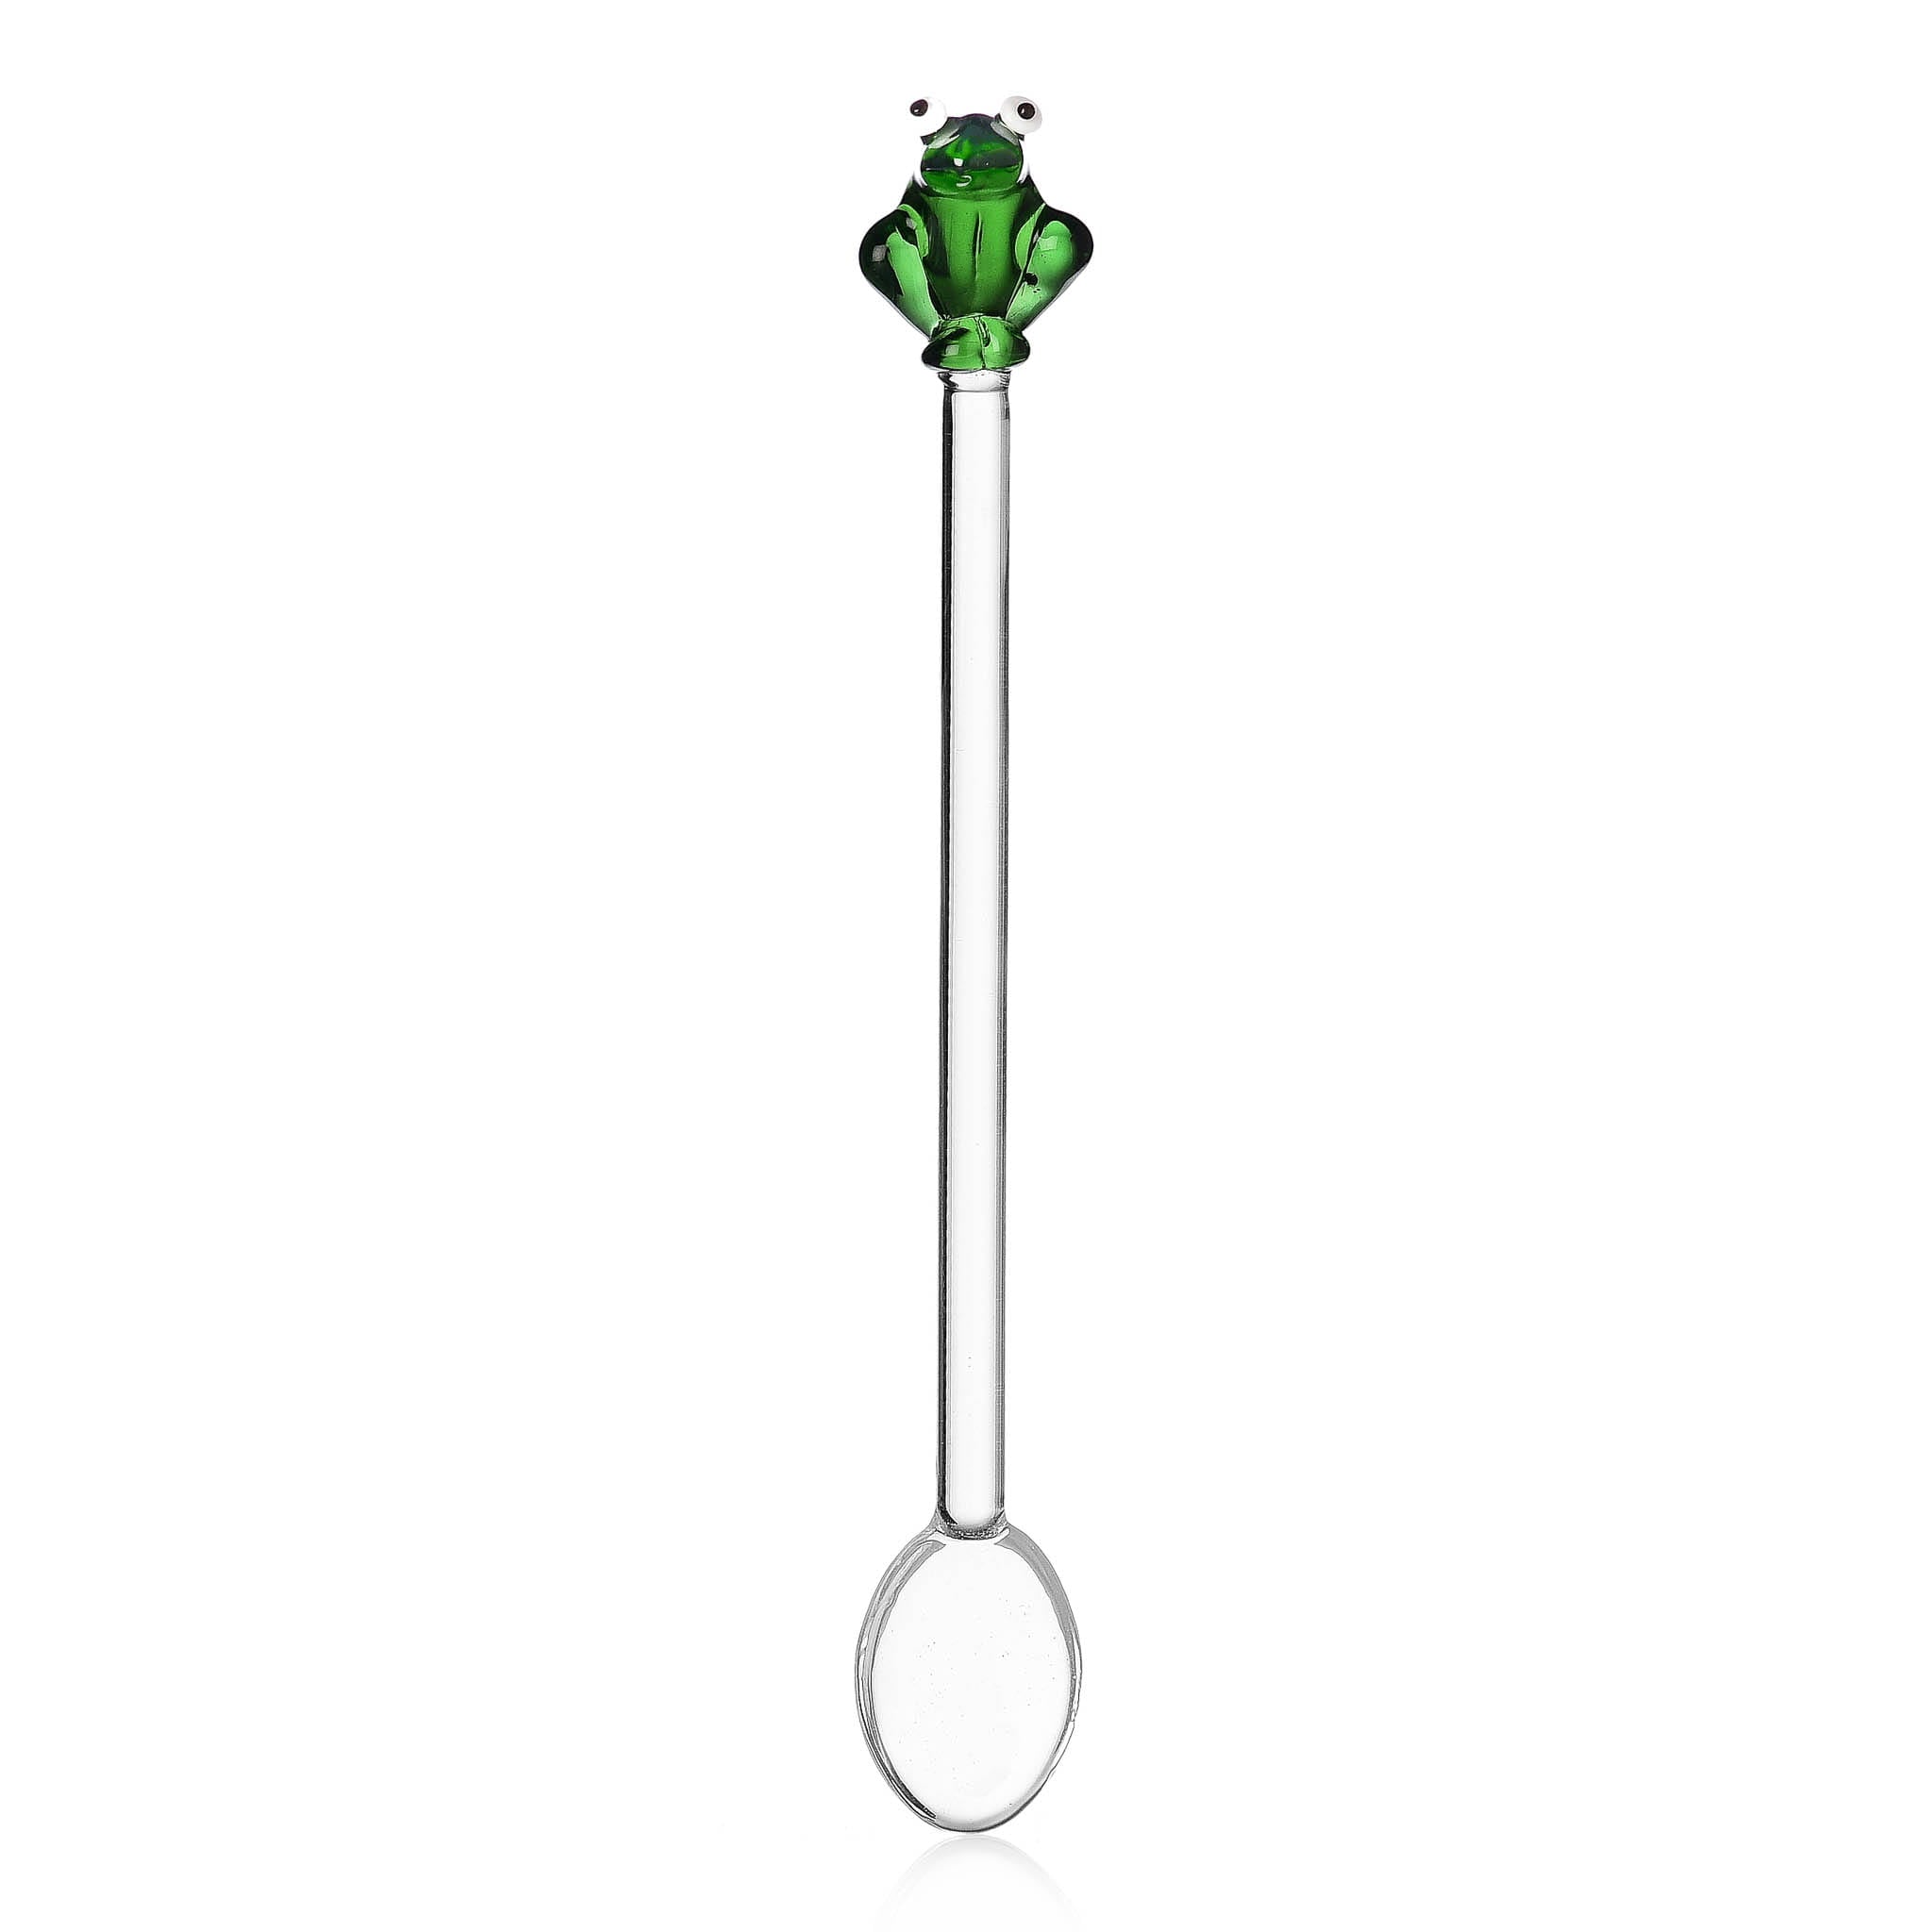 Ichendorf Milano Snail and Frog Set of 2 Stirring Spoons, 15cm